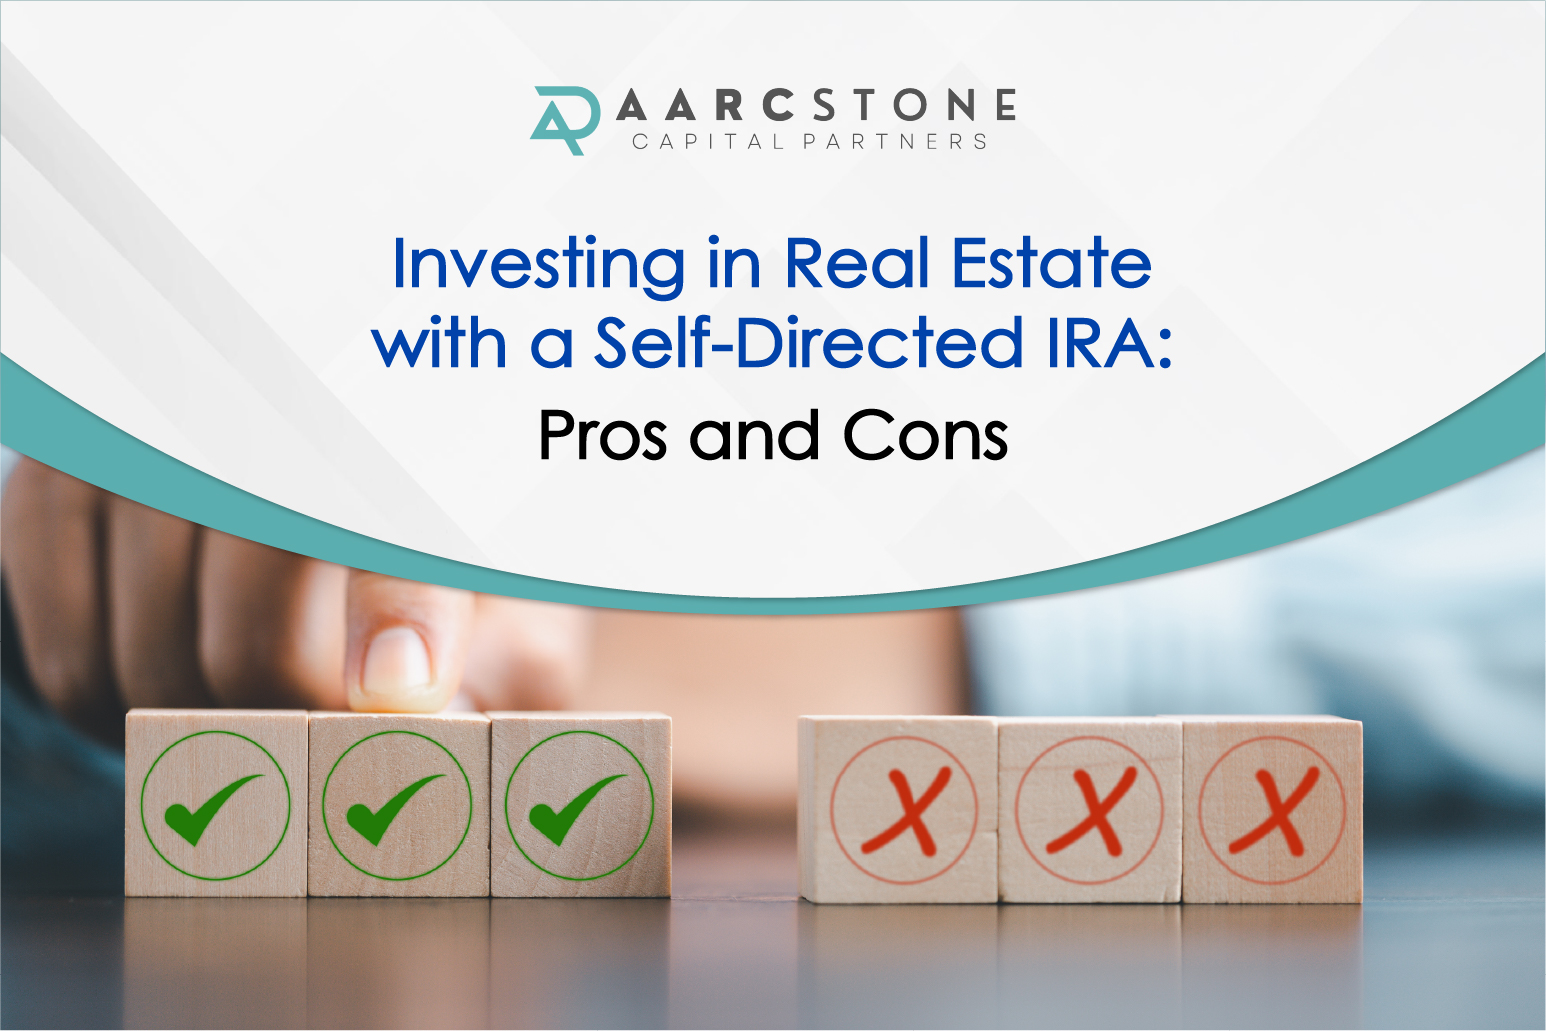 Investing in Real Estate with a Self-Directed IRA